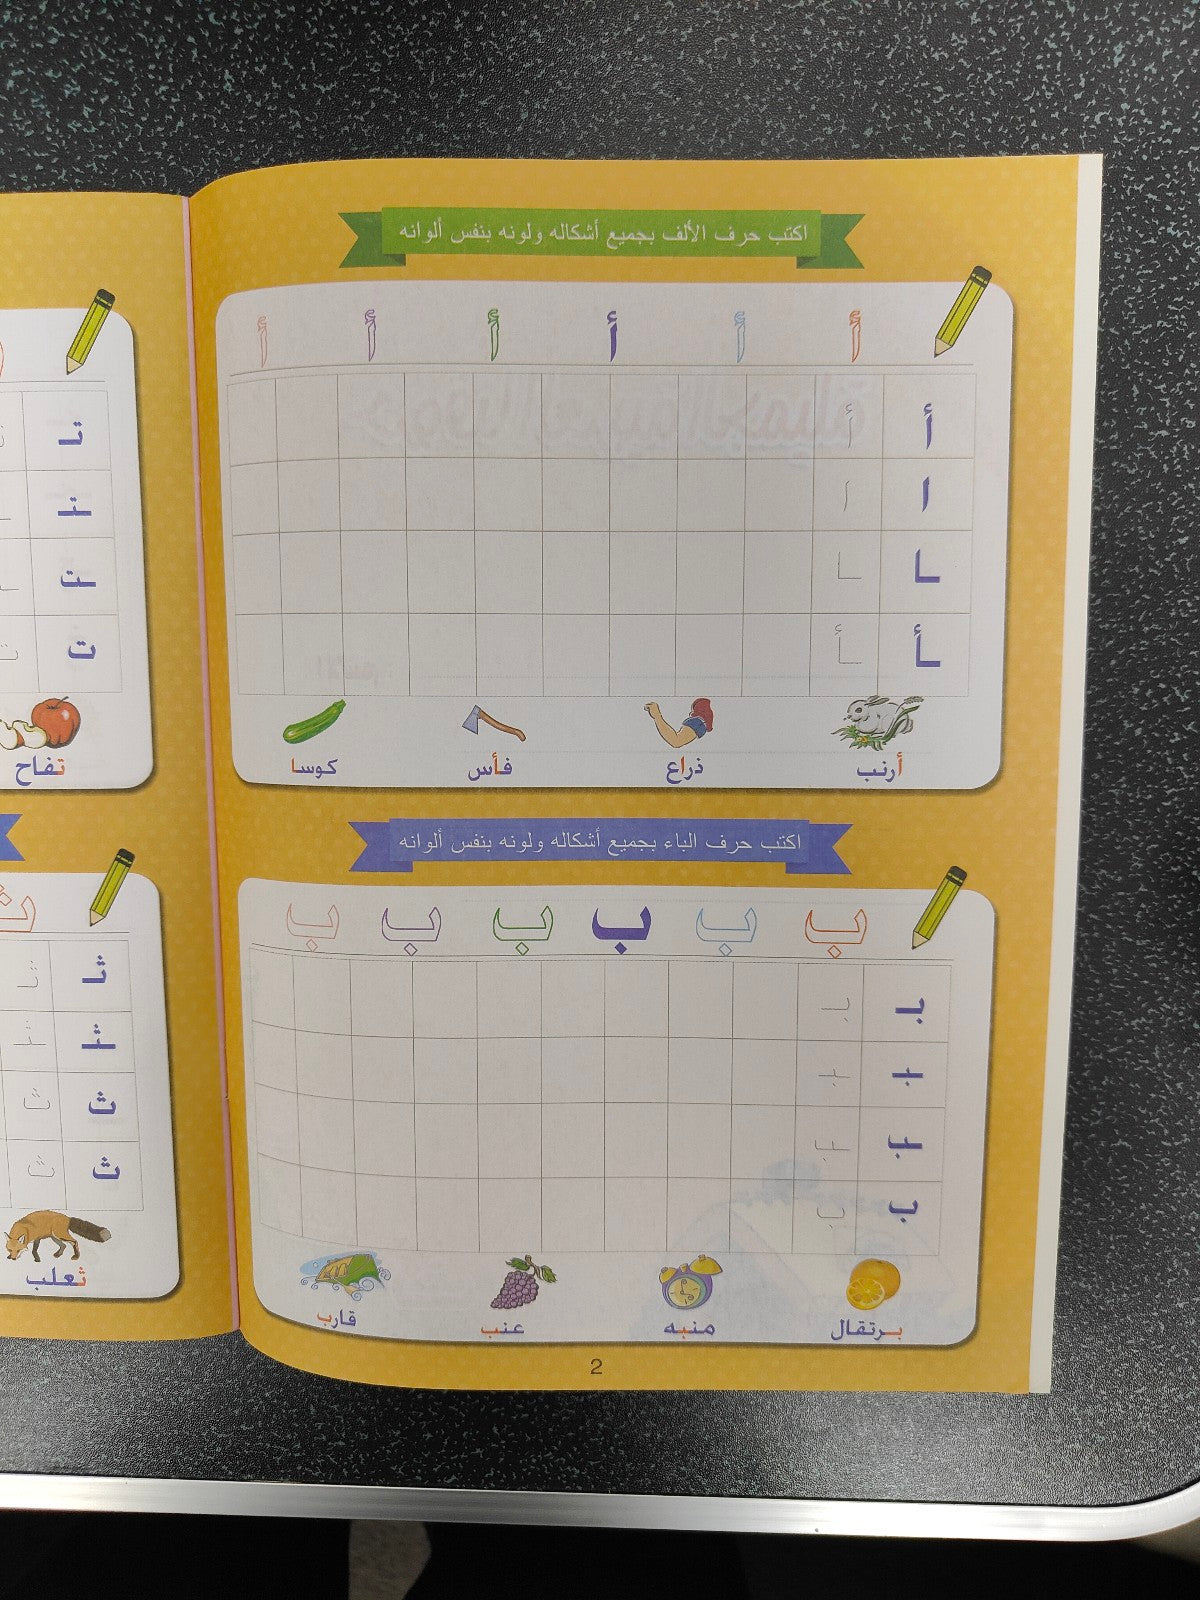 Discover the Arabic Alphabets Tracing Book at Hikmah Boutique. Help your child learn Arabic script with guided tracing lines and engaging visuals. Order now!